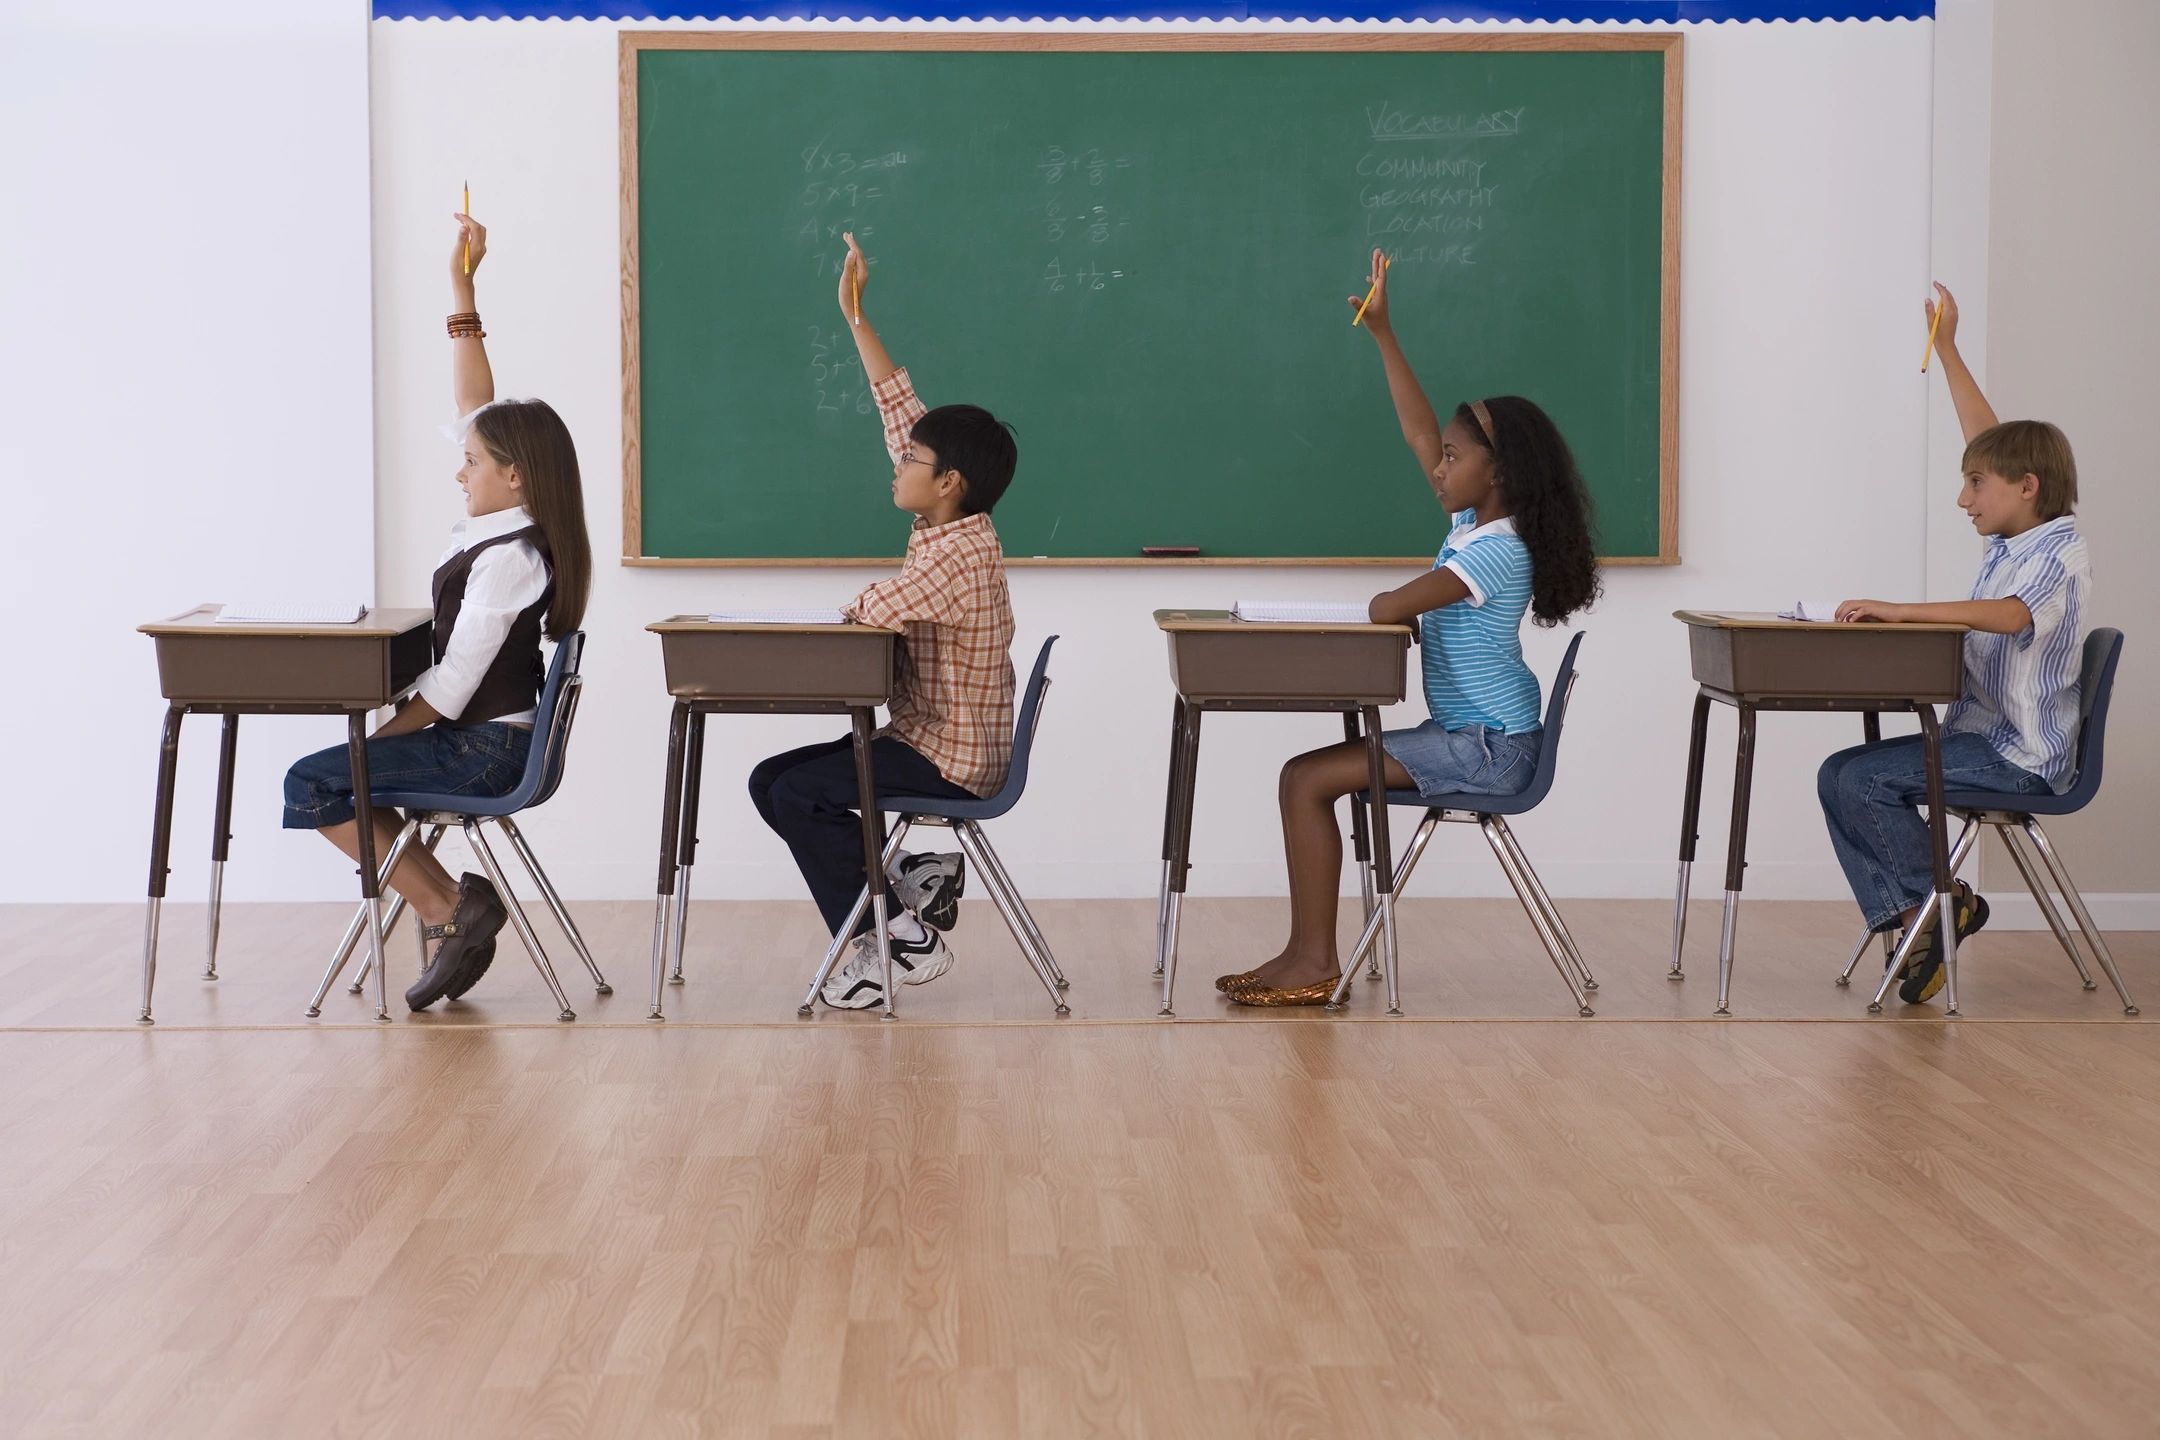 Traditional Classrooms vs. Saathi Classrooms: Which is Better?